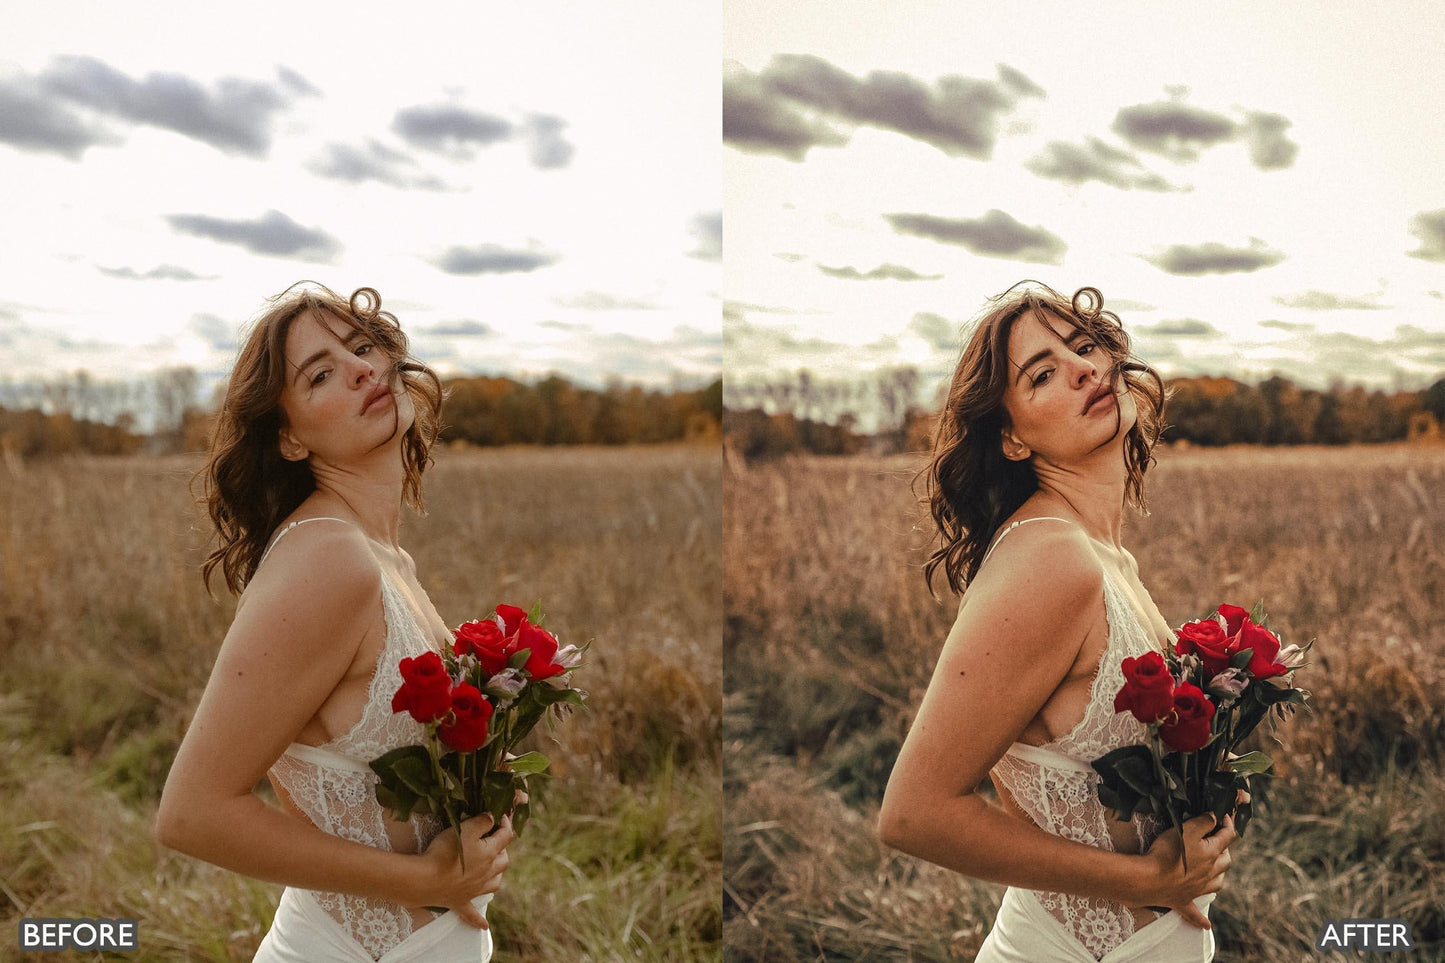 Clean & Classic Cinematic Lightroom Presets - adobe lightroom presets, Cinematic Presets, instagram presets, lightroom presets, Portrait presets, presets before and after, professional lightroom presets, summer presets, Warm Golden presets - aaapresets.com